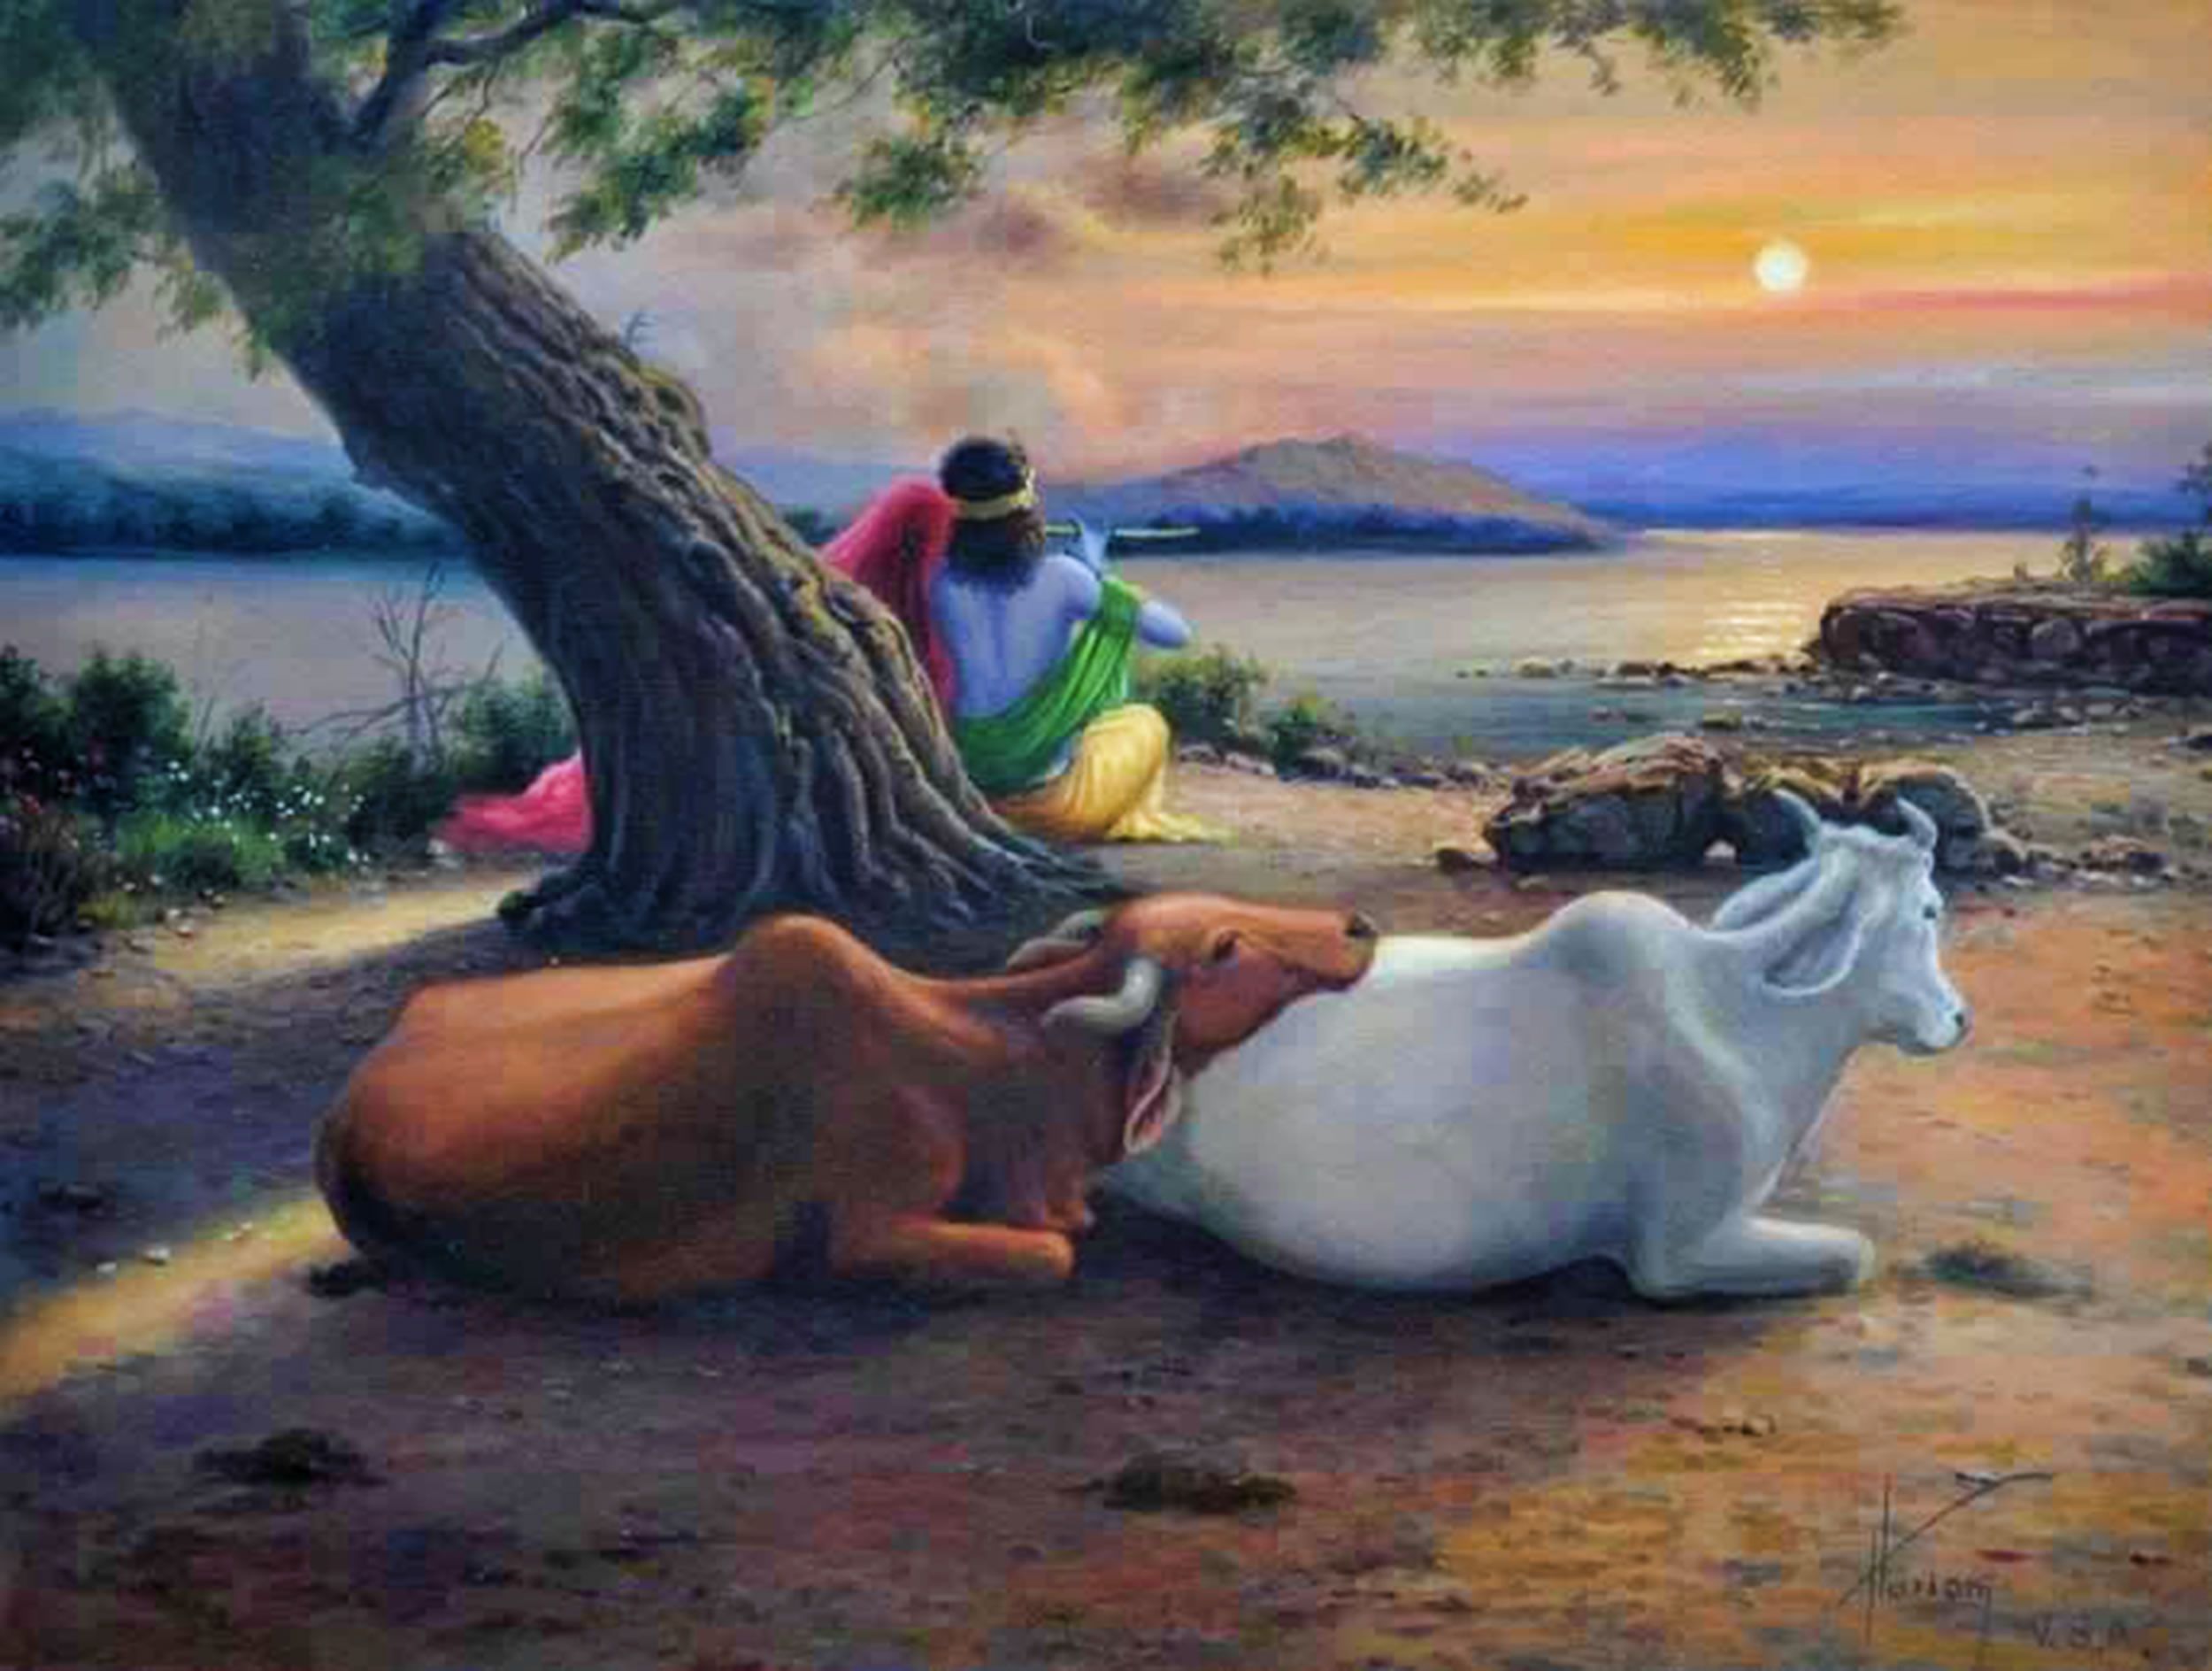 Radha and Krsna with cows at sunset